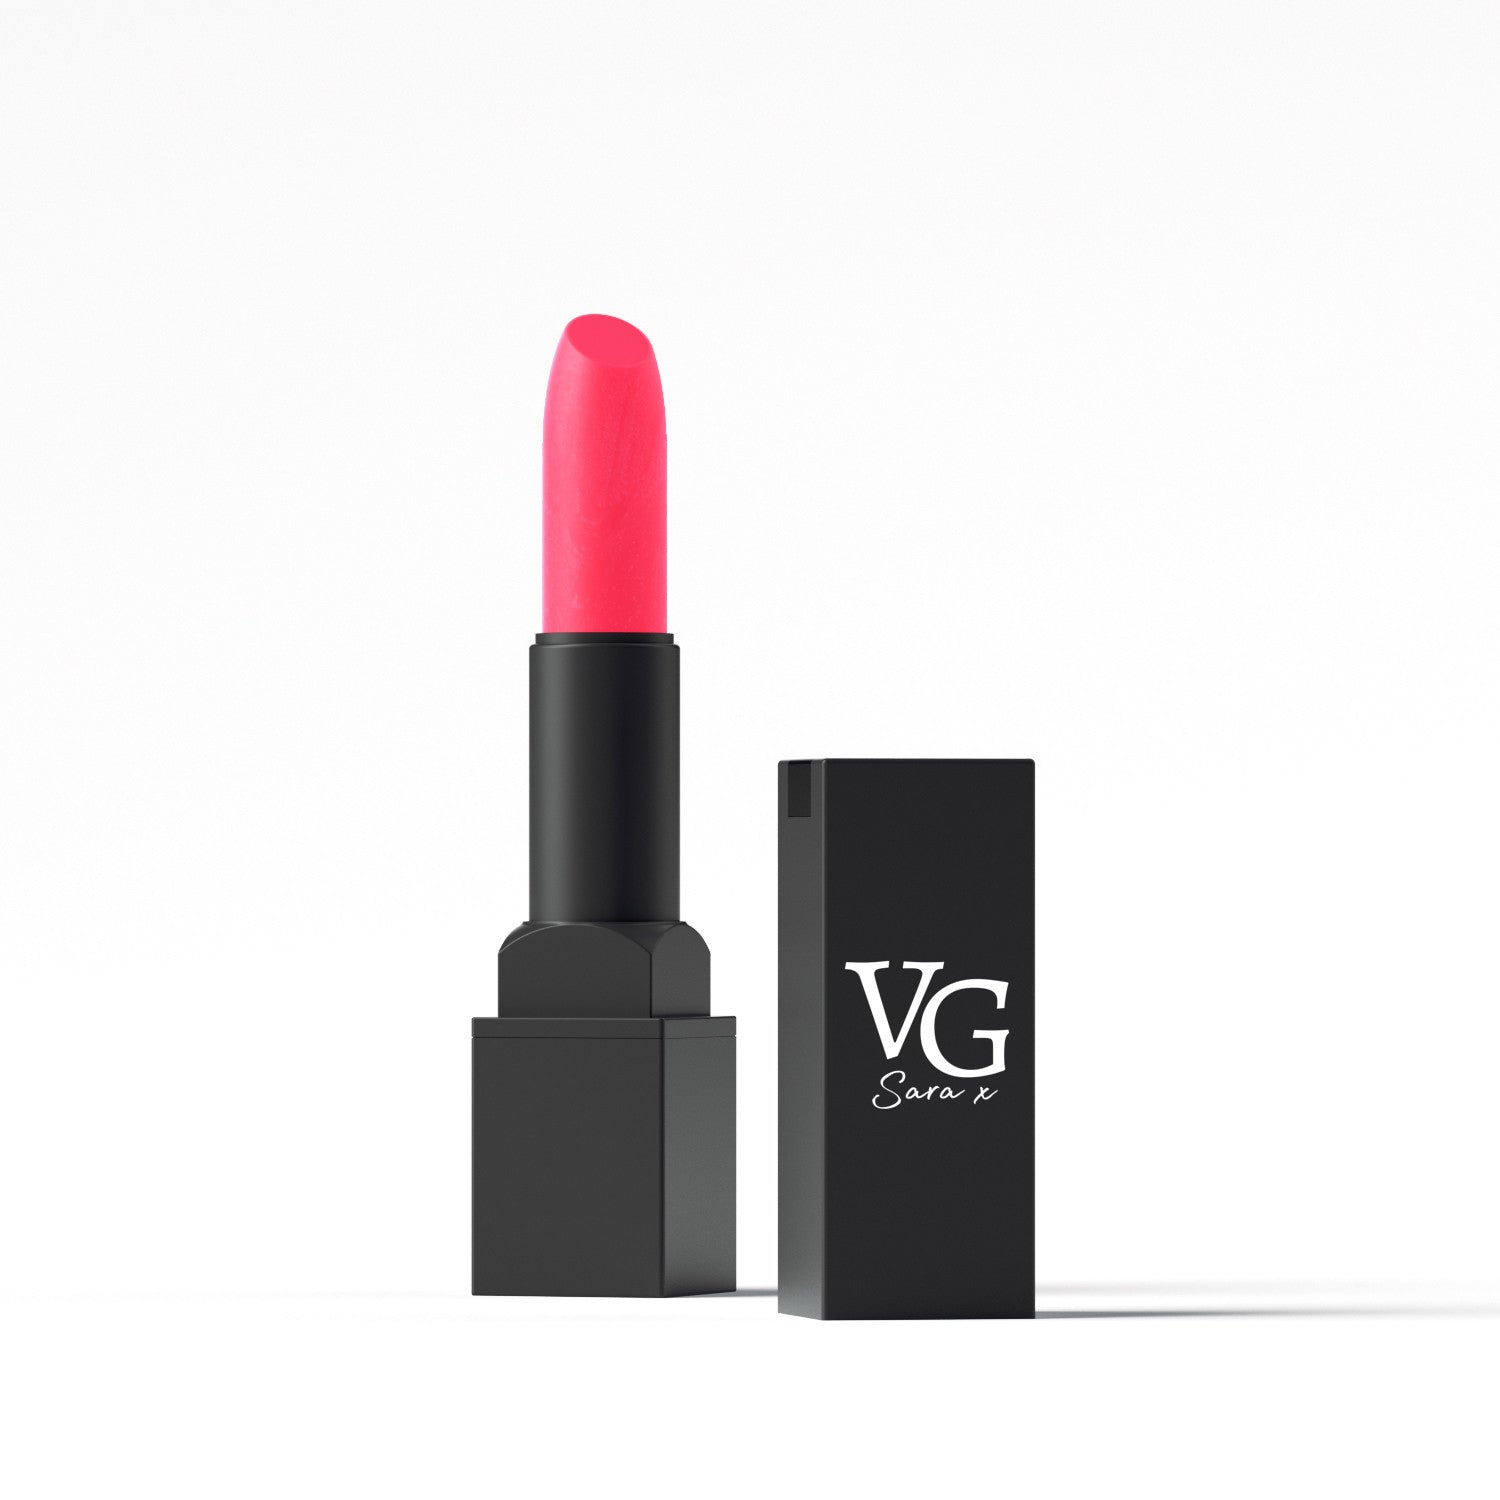 VG Cosmetics lipstick with vitamin E and VG brand detail